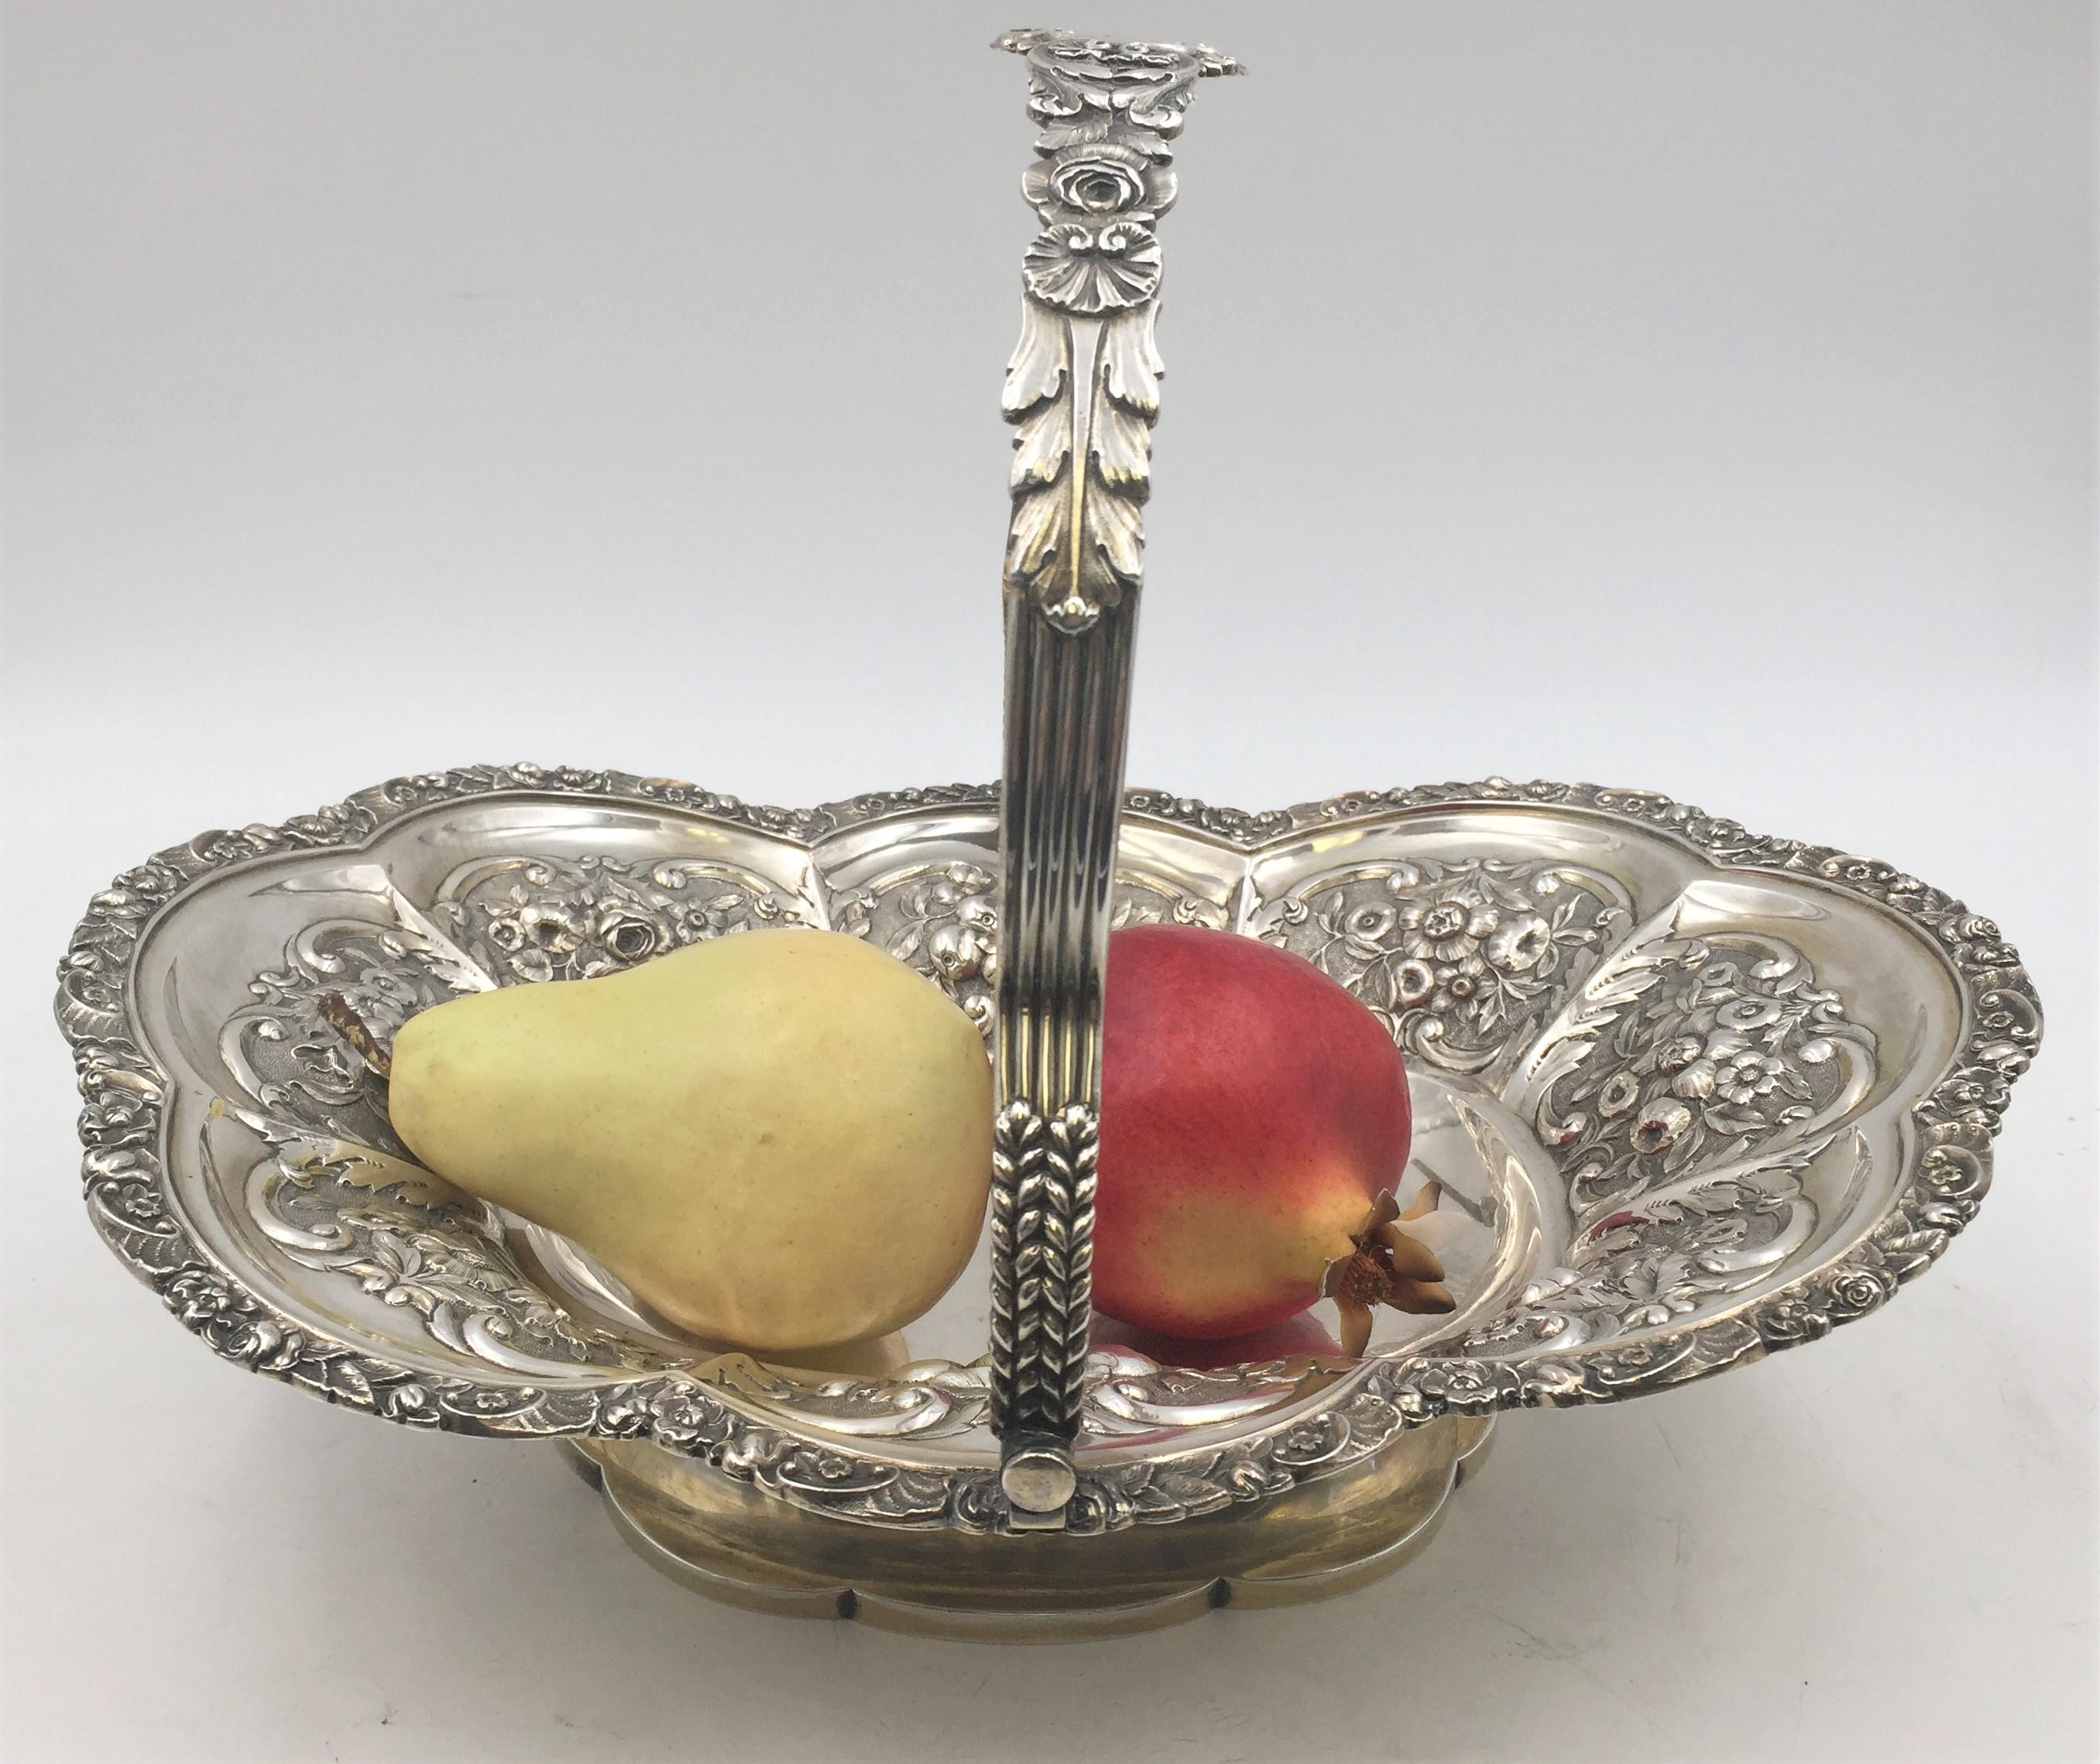 English silver basket bowl by Henry Herbert, from 1823, in detailed decorative floral design on basket and handle, standing on base. Measuring 9.8 inches tall, 13 inches long, and 10.2 inches wide. Weighing 30 troy ounces. Bearing hallmarks as